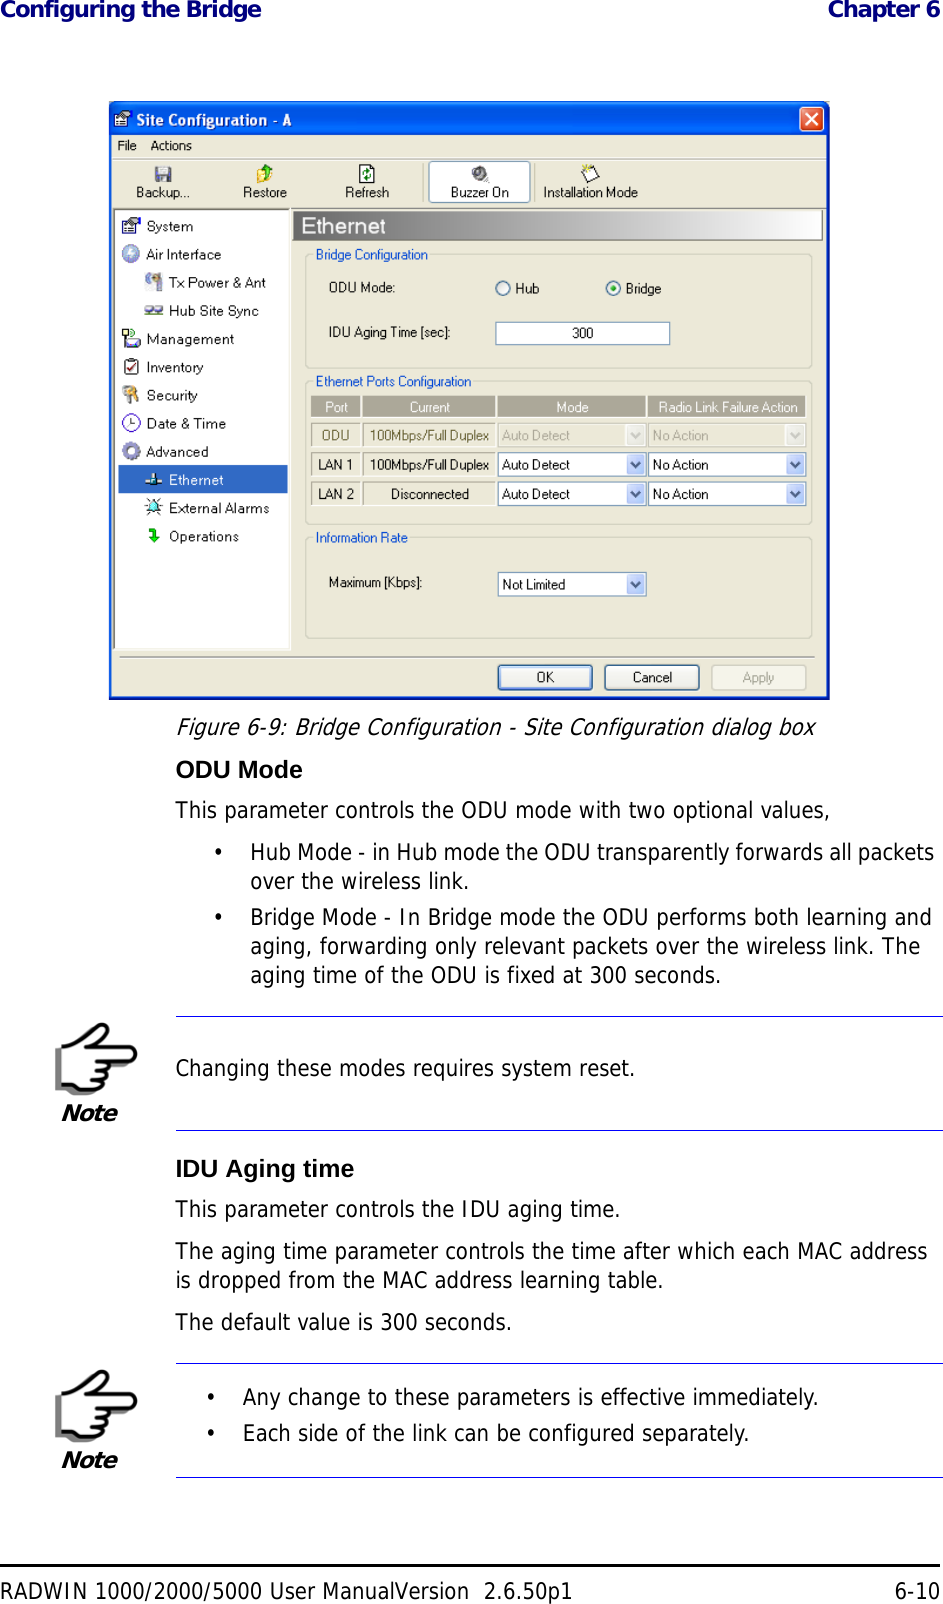 Configuring the Bridge  Chapter 6RADWIN 1000/2000/5000 User ManualVersion  2.6.50p1 6-10Figure 6-9: Bridge Configuration - Site Configuration dialog boxODU ModeThis parameter controls the ODU mode with two optional values, • Hub Mode - in Hub mode the ODU transparently forwards all packets over the wireless link.• Bridge Mode - In Bridge mode the ODU performs both learning and aging, forwarding only relevant packets over the wireless link. The aging time of the ODU is fixed at 300 seconds.IDU Aging timeThis parameter controls the IDU aging time.The aging time parameter controls the time after which each MAC address is dropped from the MAC address learning table.The default value is 300 seconds.NoteChanging these modes requires system reset.Note• Any change to these parameters is effective immediately.• Each side of the link can be configured separately.